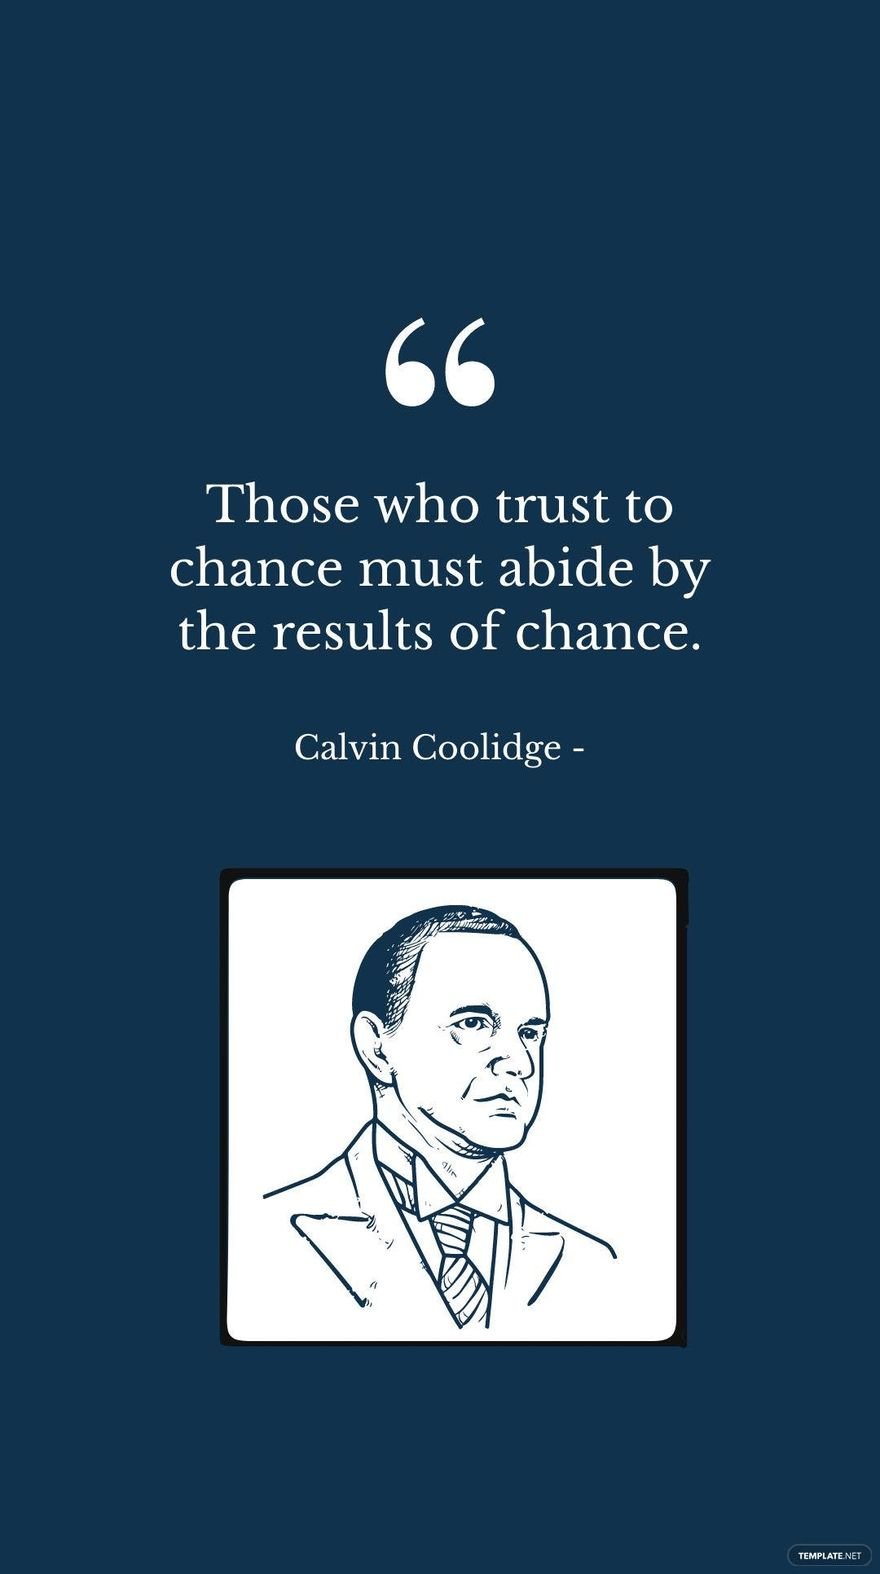 Calvin Coolidge - Those who trust to chance must abide by the results of chance. in JPG